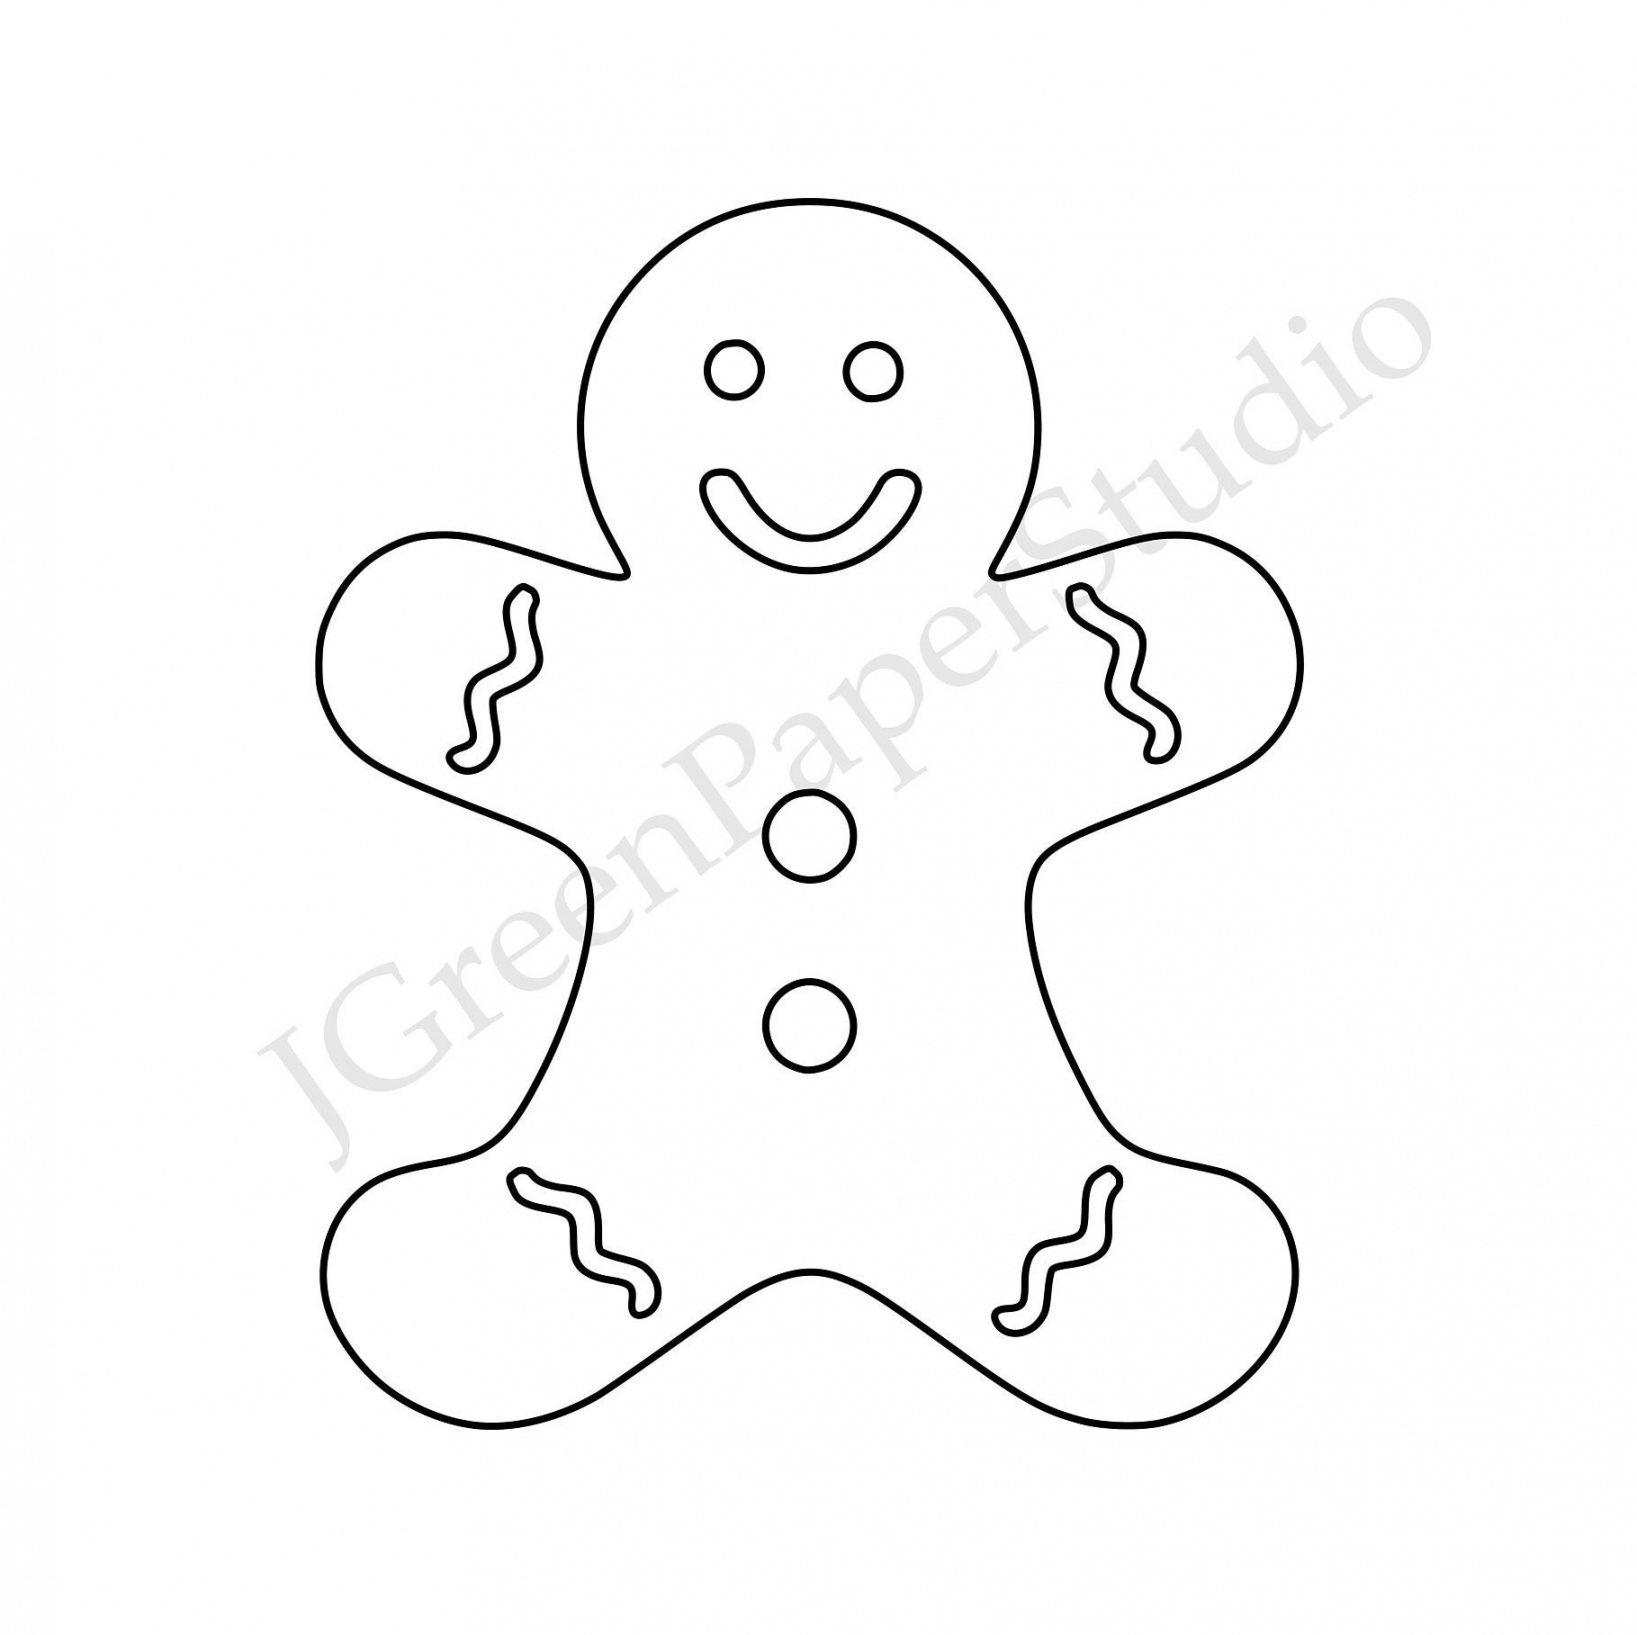 Printable Gingerbread Man Template-PDF Digital Download Cookie Kids Holiday  Coloring Page Kids Craft Stencil -inch Gingerbread Scrapbooking - FREE Printables - Gingerbread Cut Out Printable